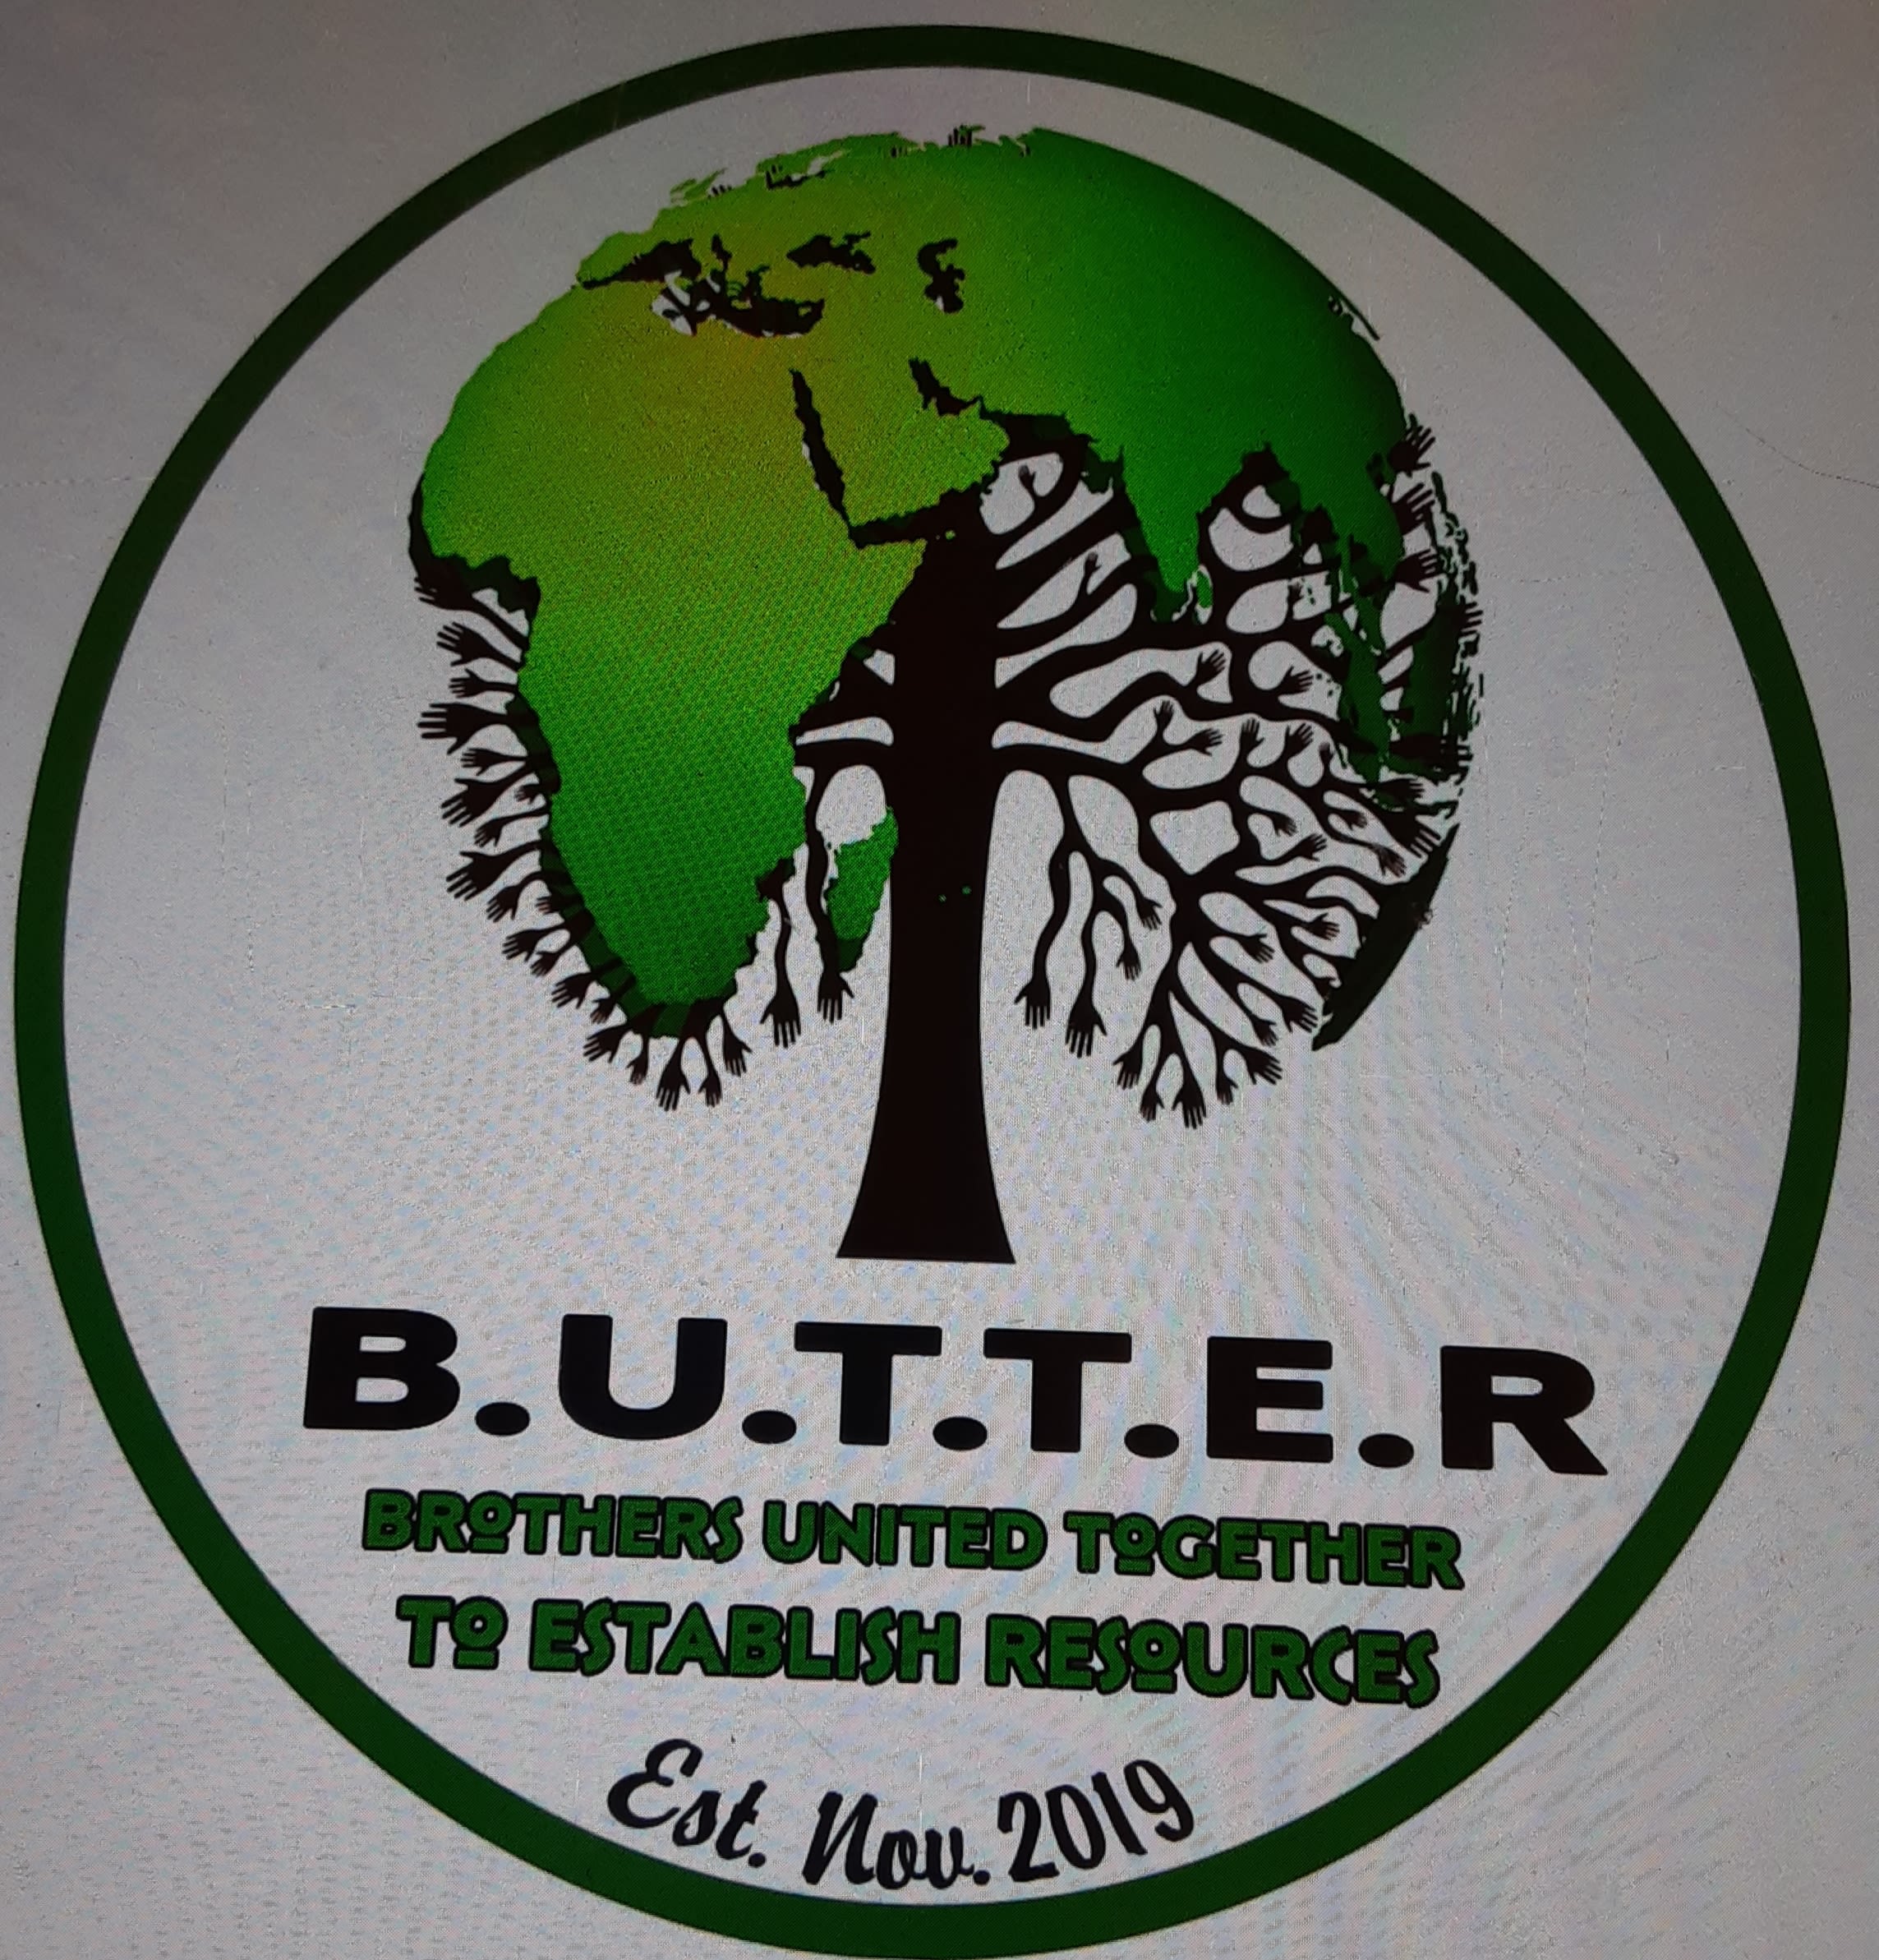 Brothers United Together To Establish Resources/ dba: B.U.T.T.E.R (A Grassroots Movement)